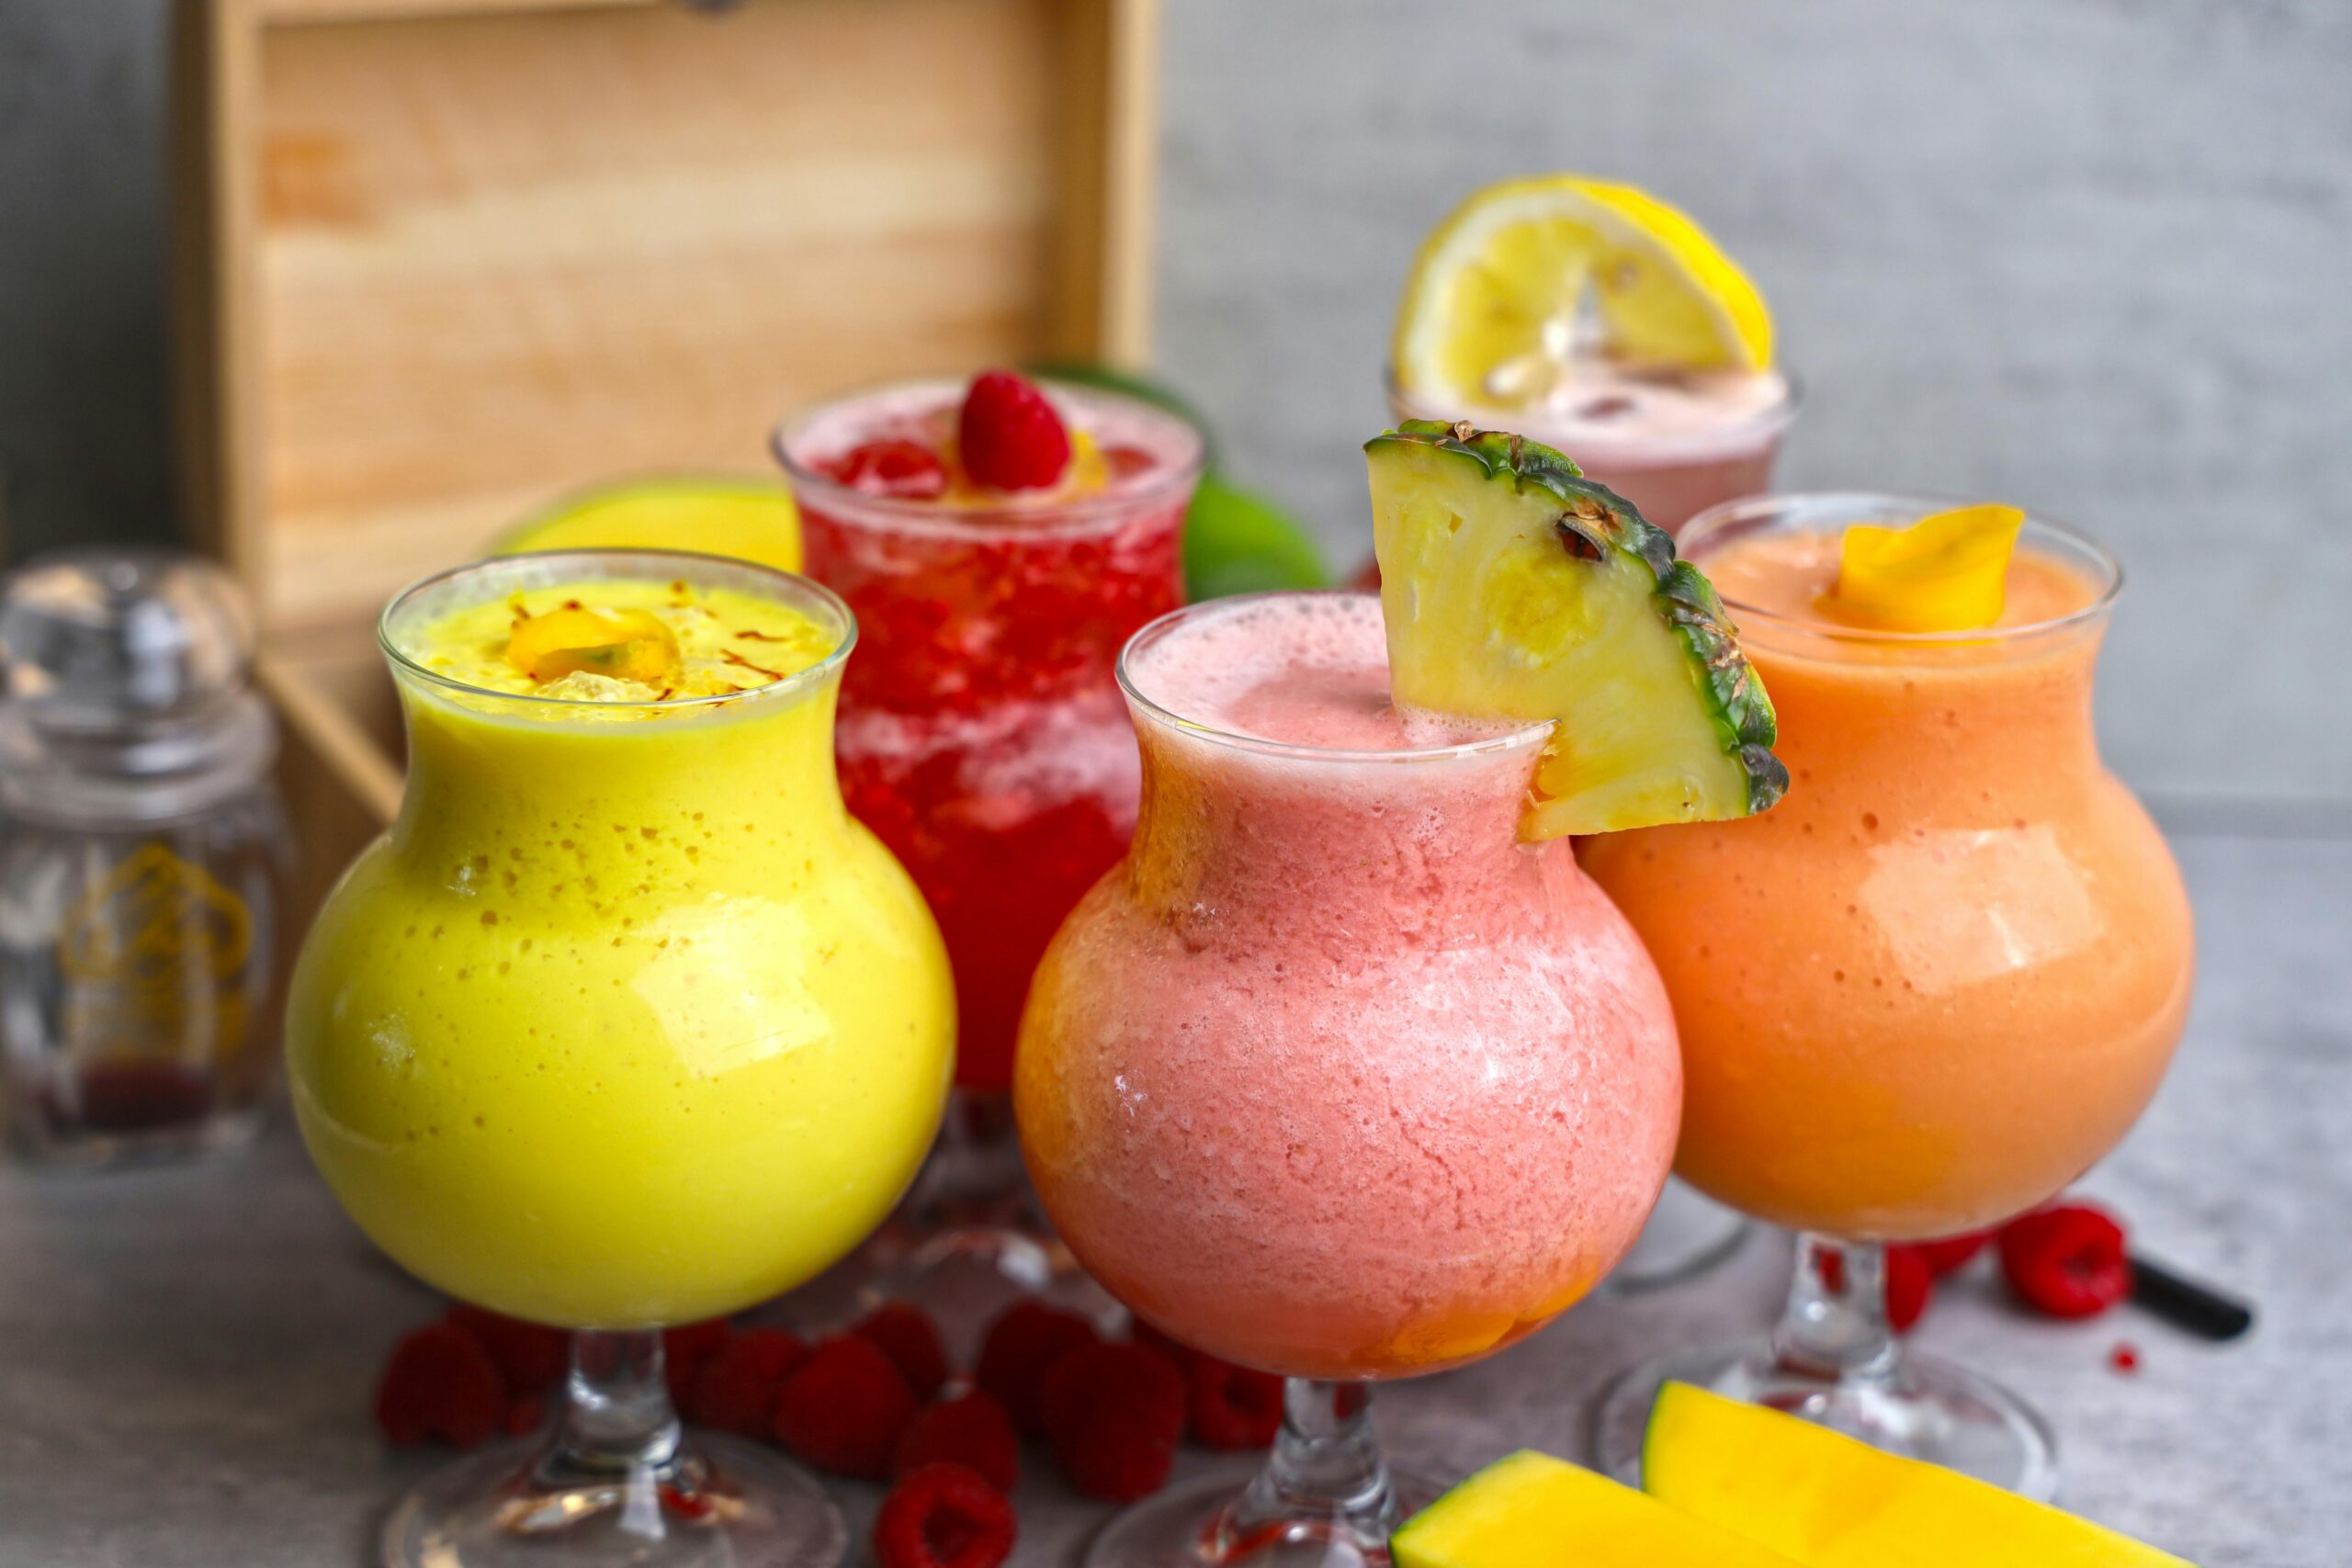 "A lime green, pink, orange and red cocktail with lemon and pineapple slices on a gray background"